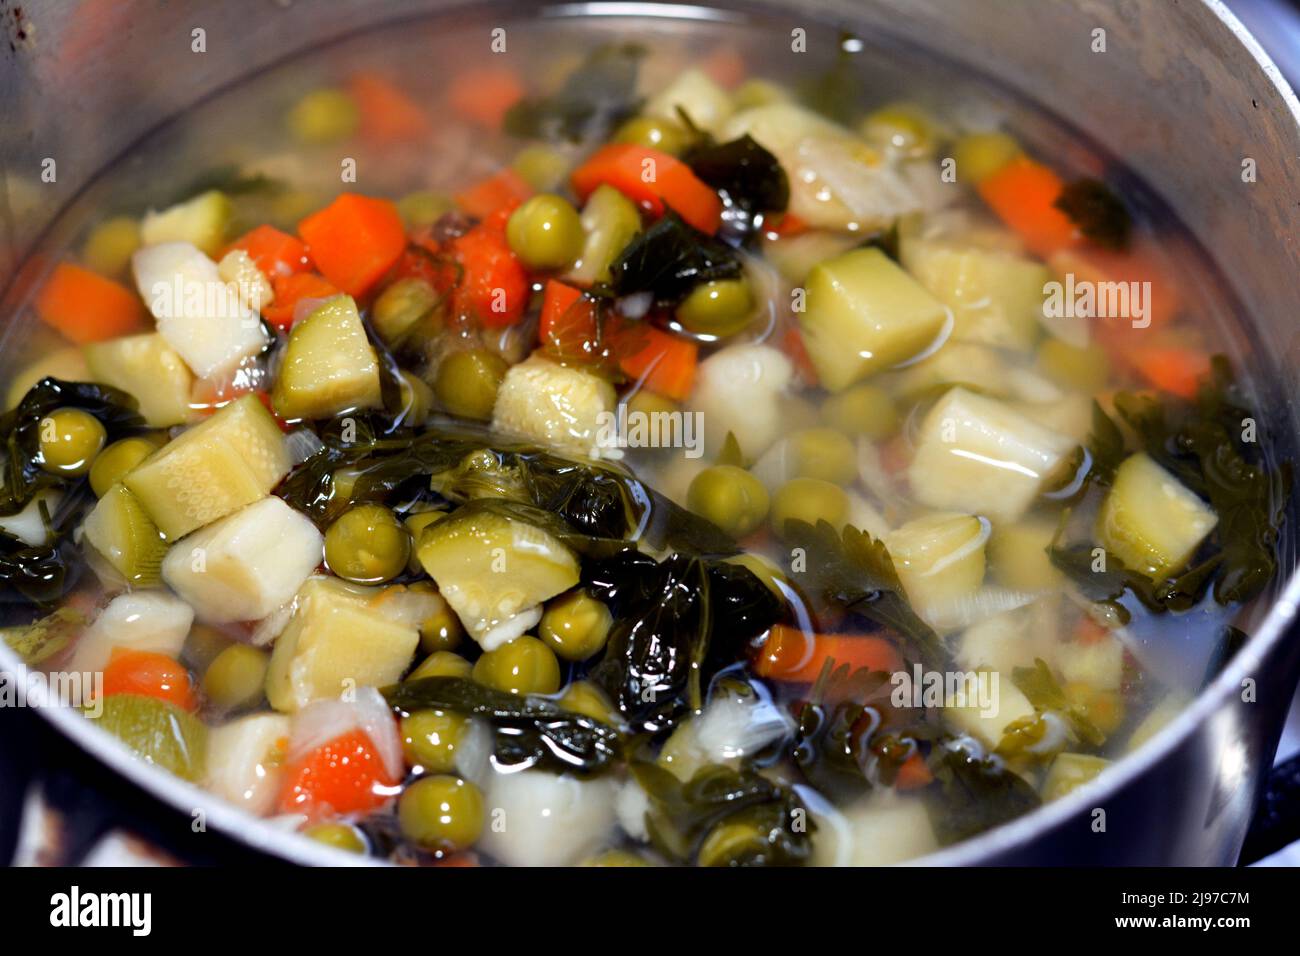 vegetables soup made of pieces and slices of carrots, peas, potatoes, onions, zucchini, celery and other fresh vegan food salted and boiled, healthy f Stock Photo